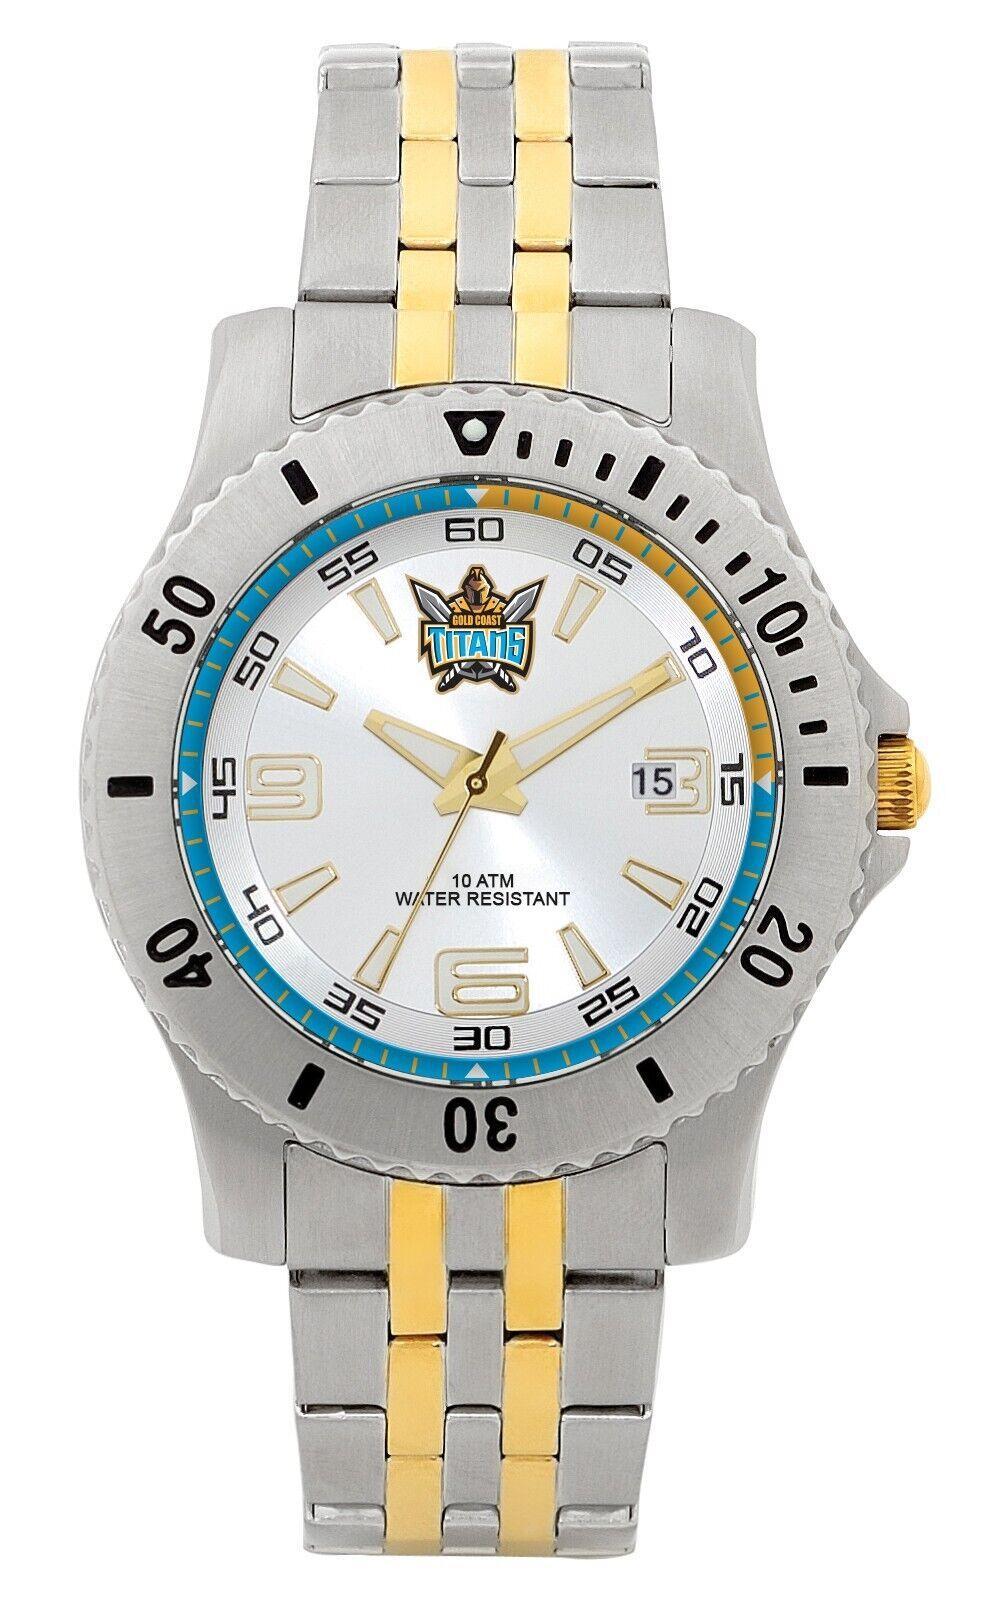 NRL Legends Watch - Gold Coast Titans - Stainless Steel Band - Box incl.